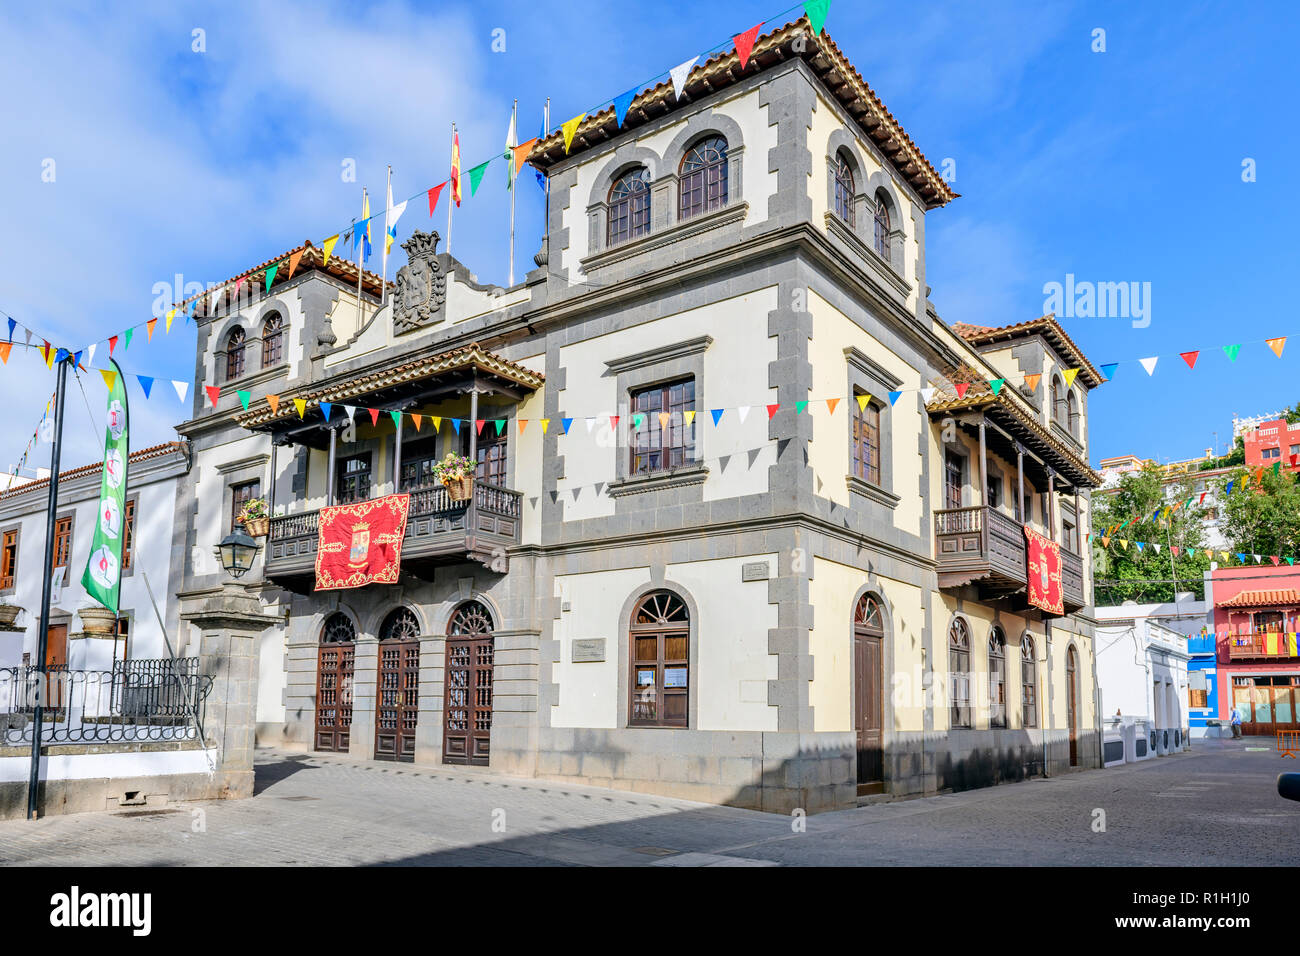 The town or city hall, Teror Gran Canaria Canary Islands Stock Photo